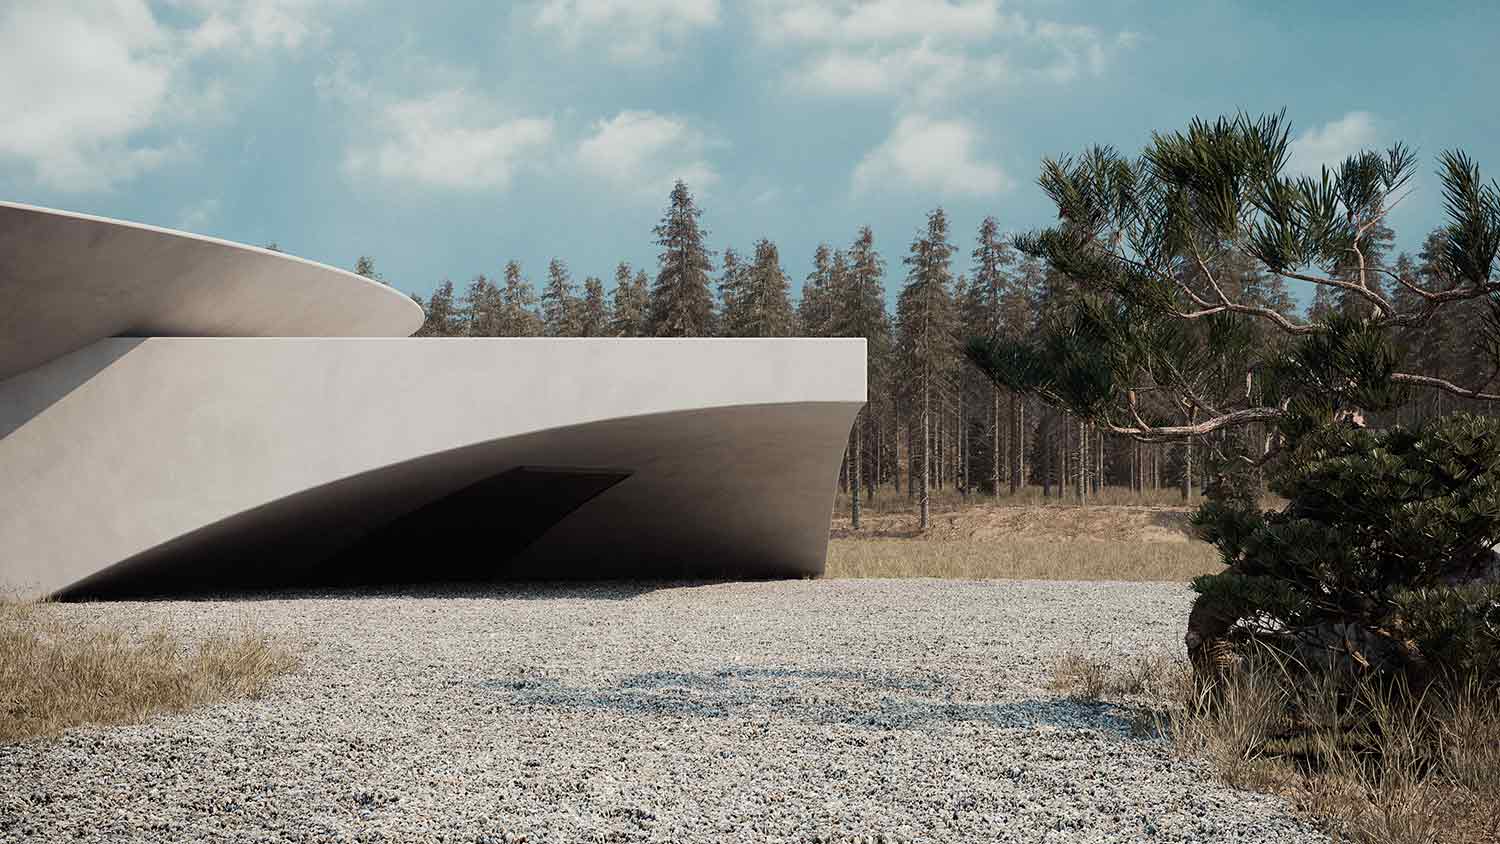 Bunker home Plan B is designed to outlast the apocalypse – in style